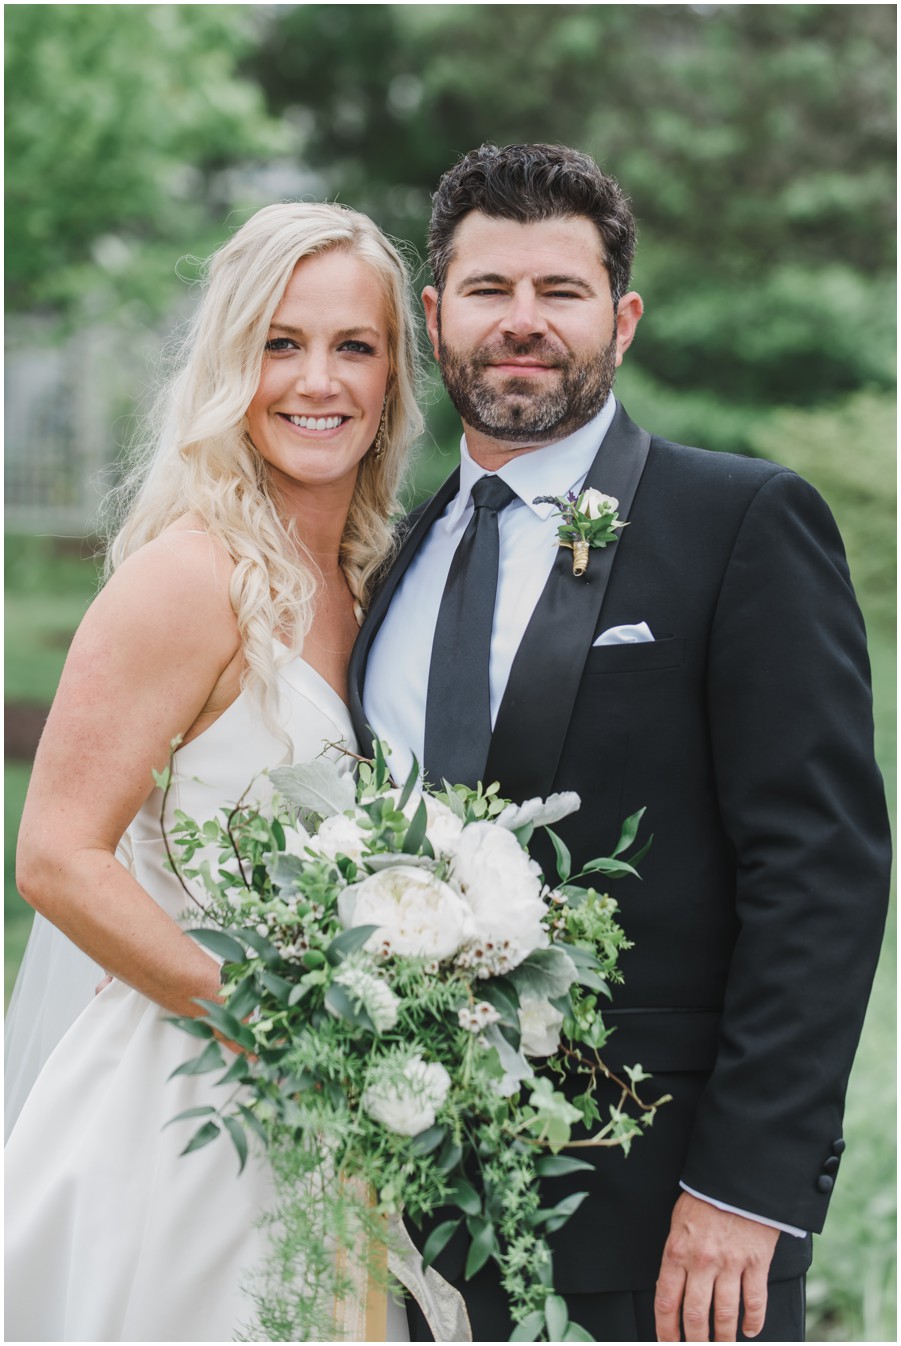 Eastern Shore Wedding- Portrait of Bride and Groom First Look at the Inn at Perry Cabin by Melissa Grimes-Guy Photography